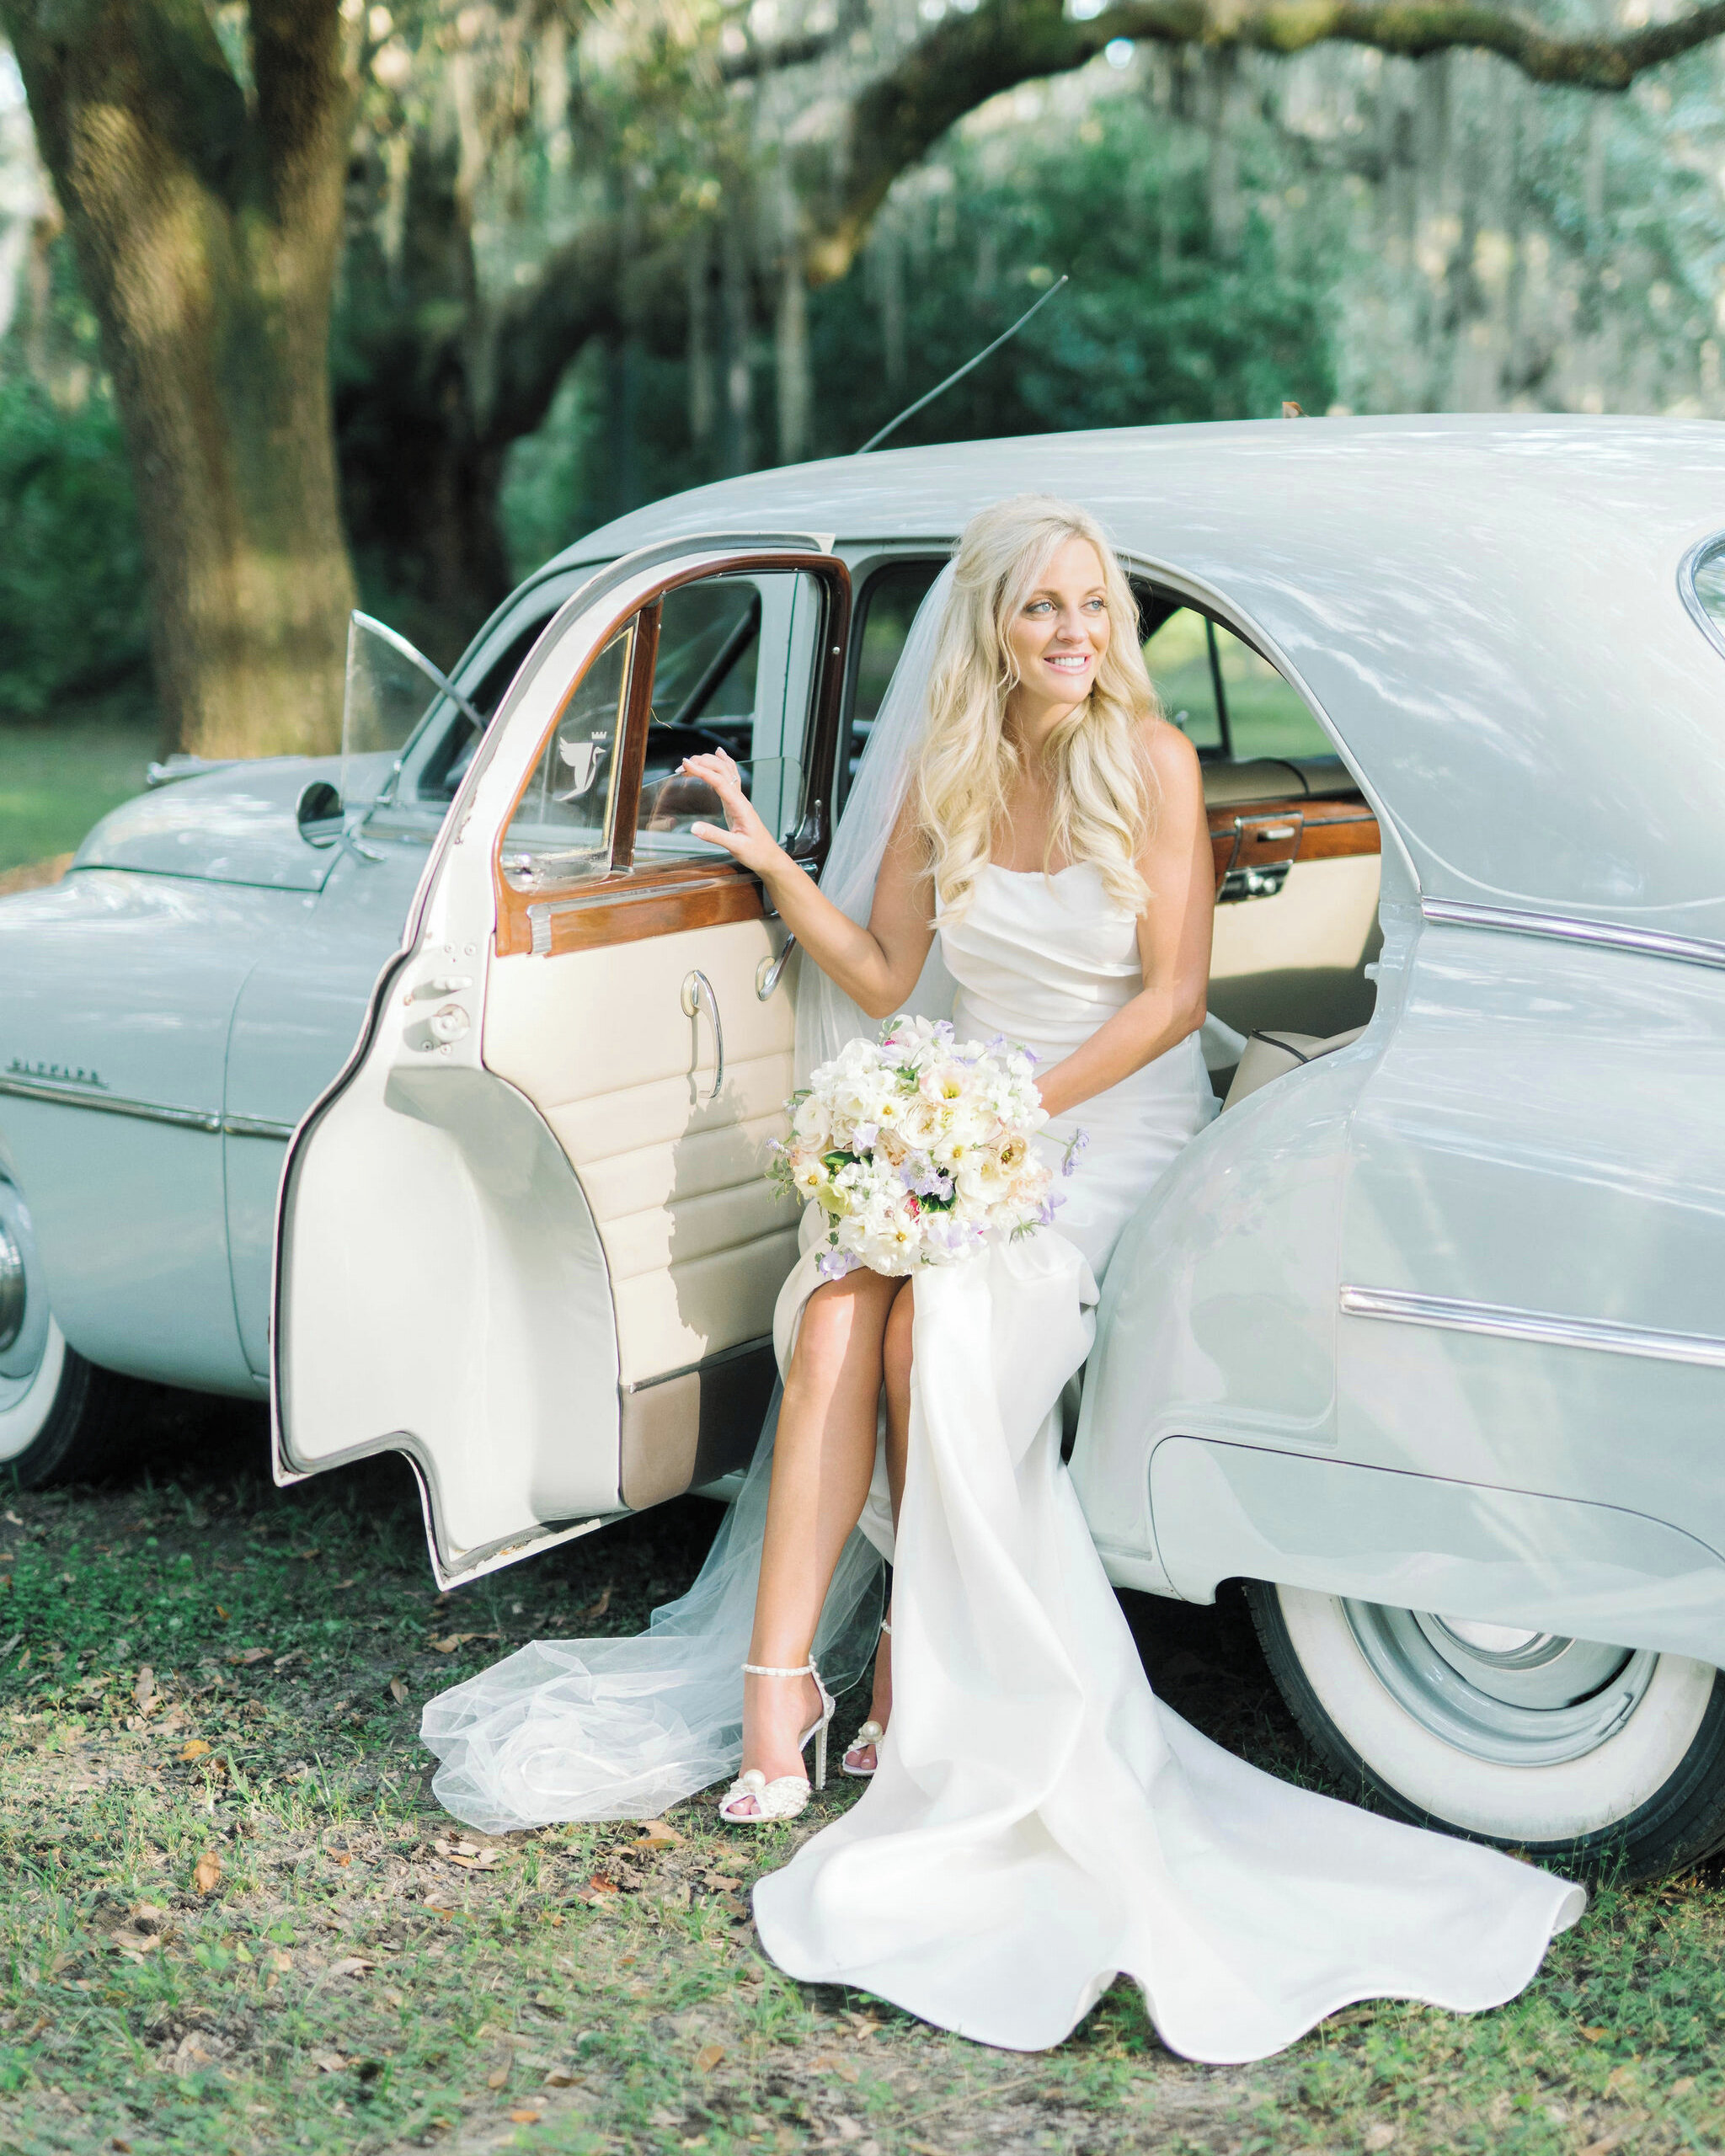 Heather looking gorgeous stepping out of this vintage car moments before the ceremony  @aaronandjillian